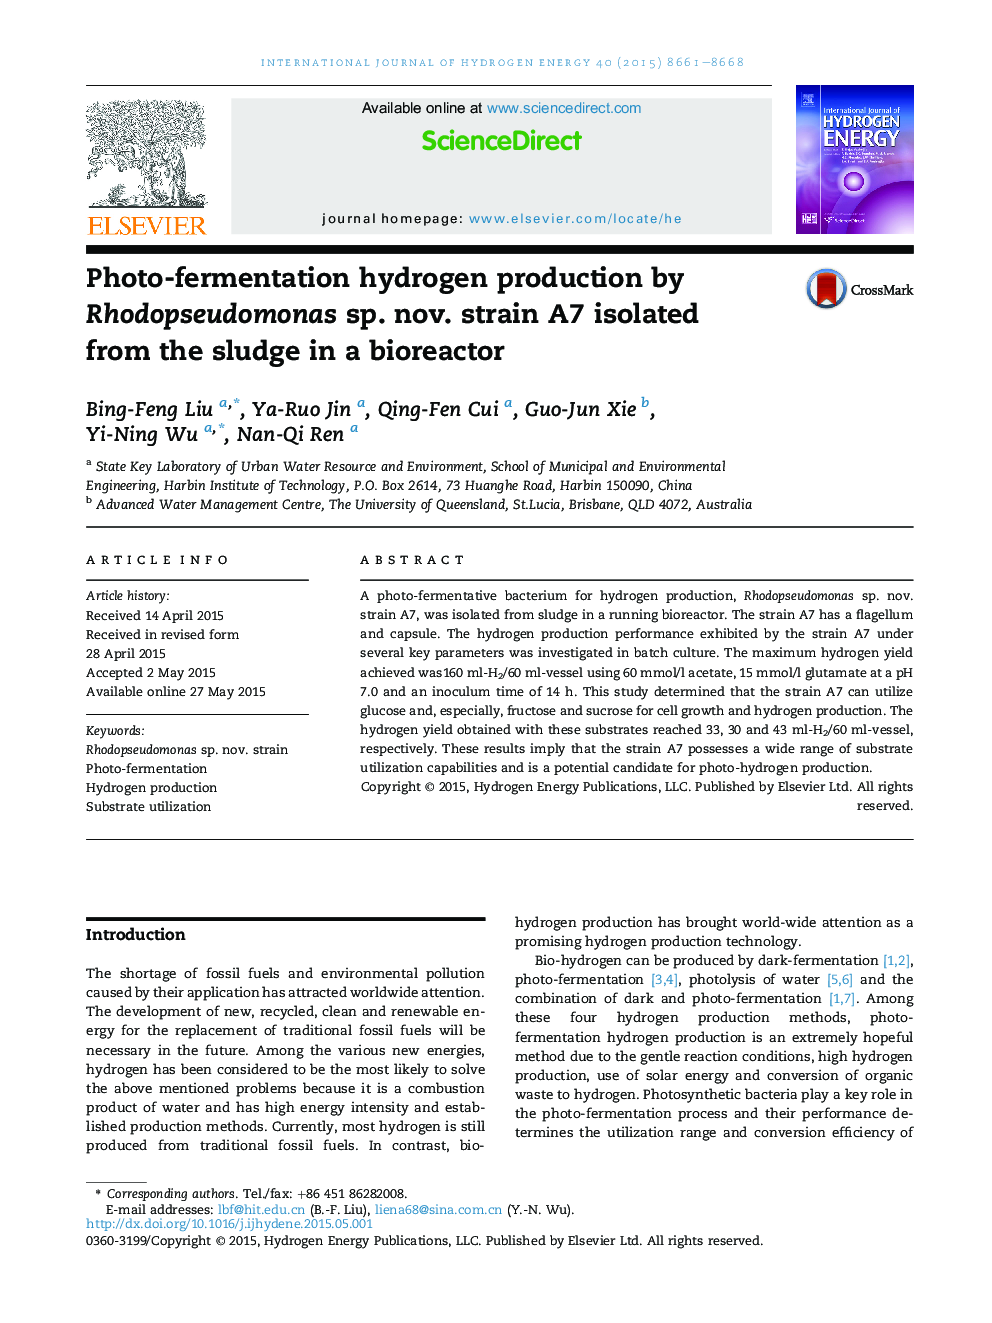 Photo-fermentation hydrogen production by Rhodopseudomonas sp. nov. strain A7 isolated from the sludge in a bioreactor